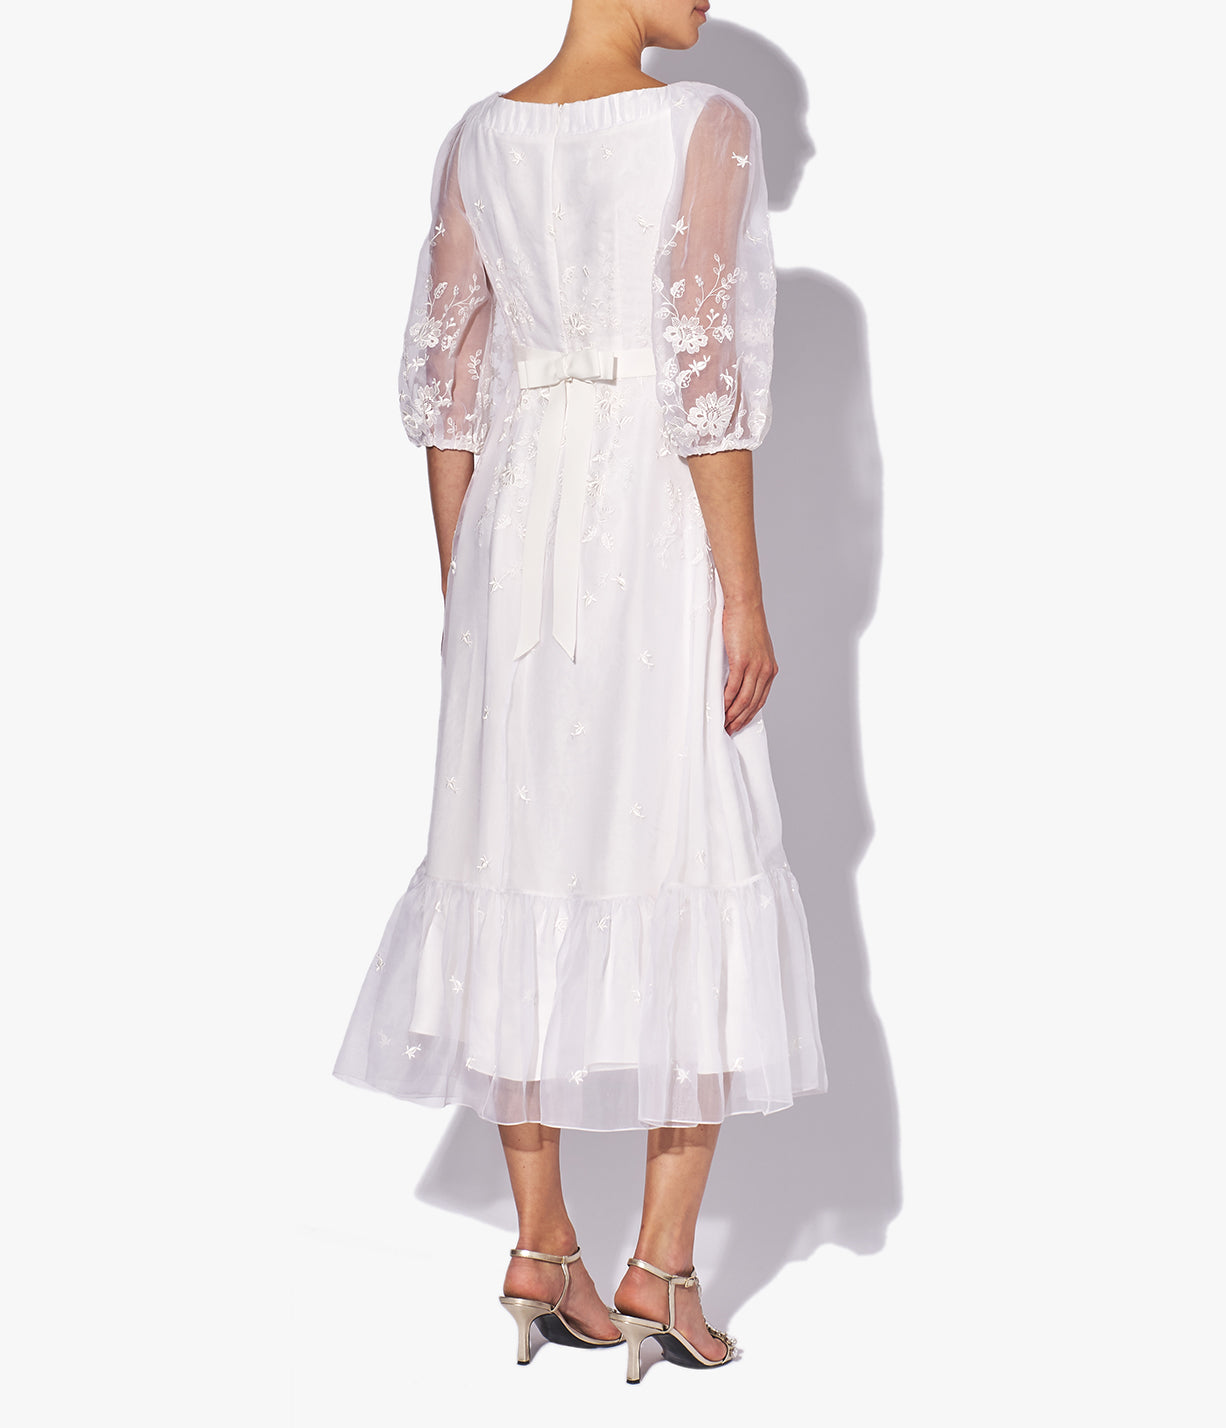  the Floredice Dress perfectly showcases Erdem’s vision for the White Collection.